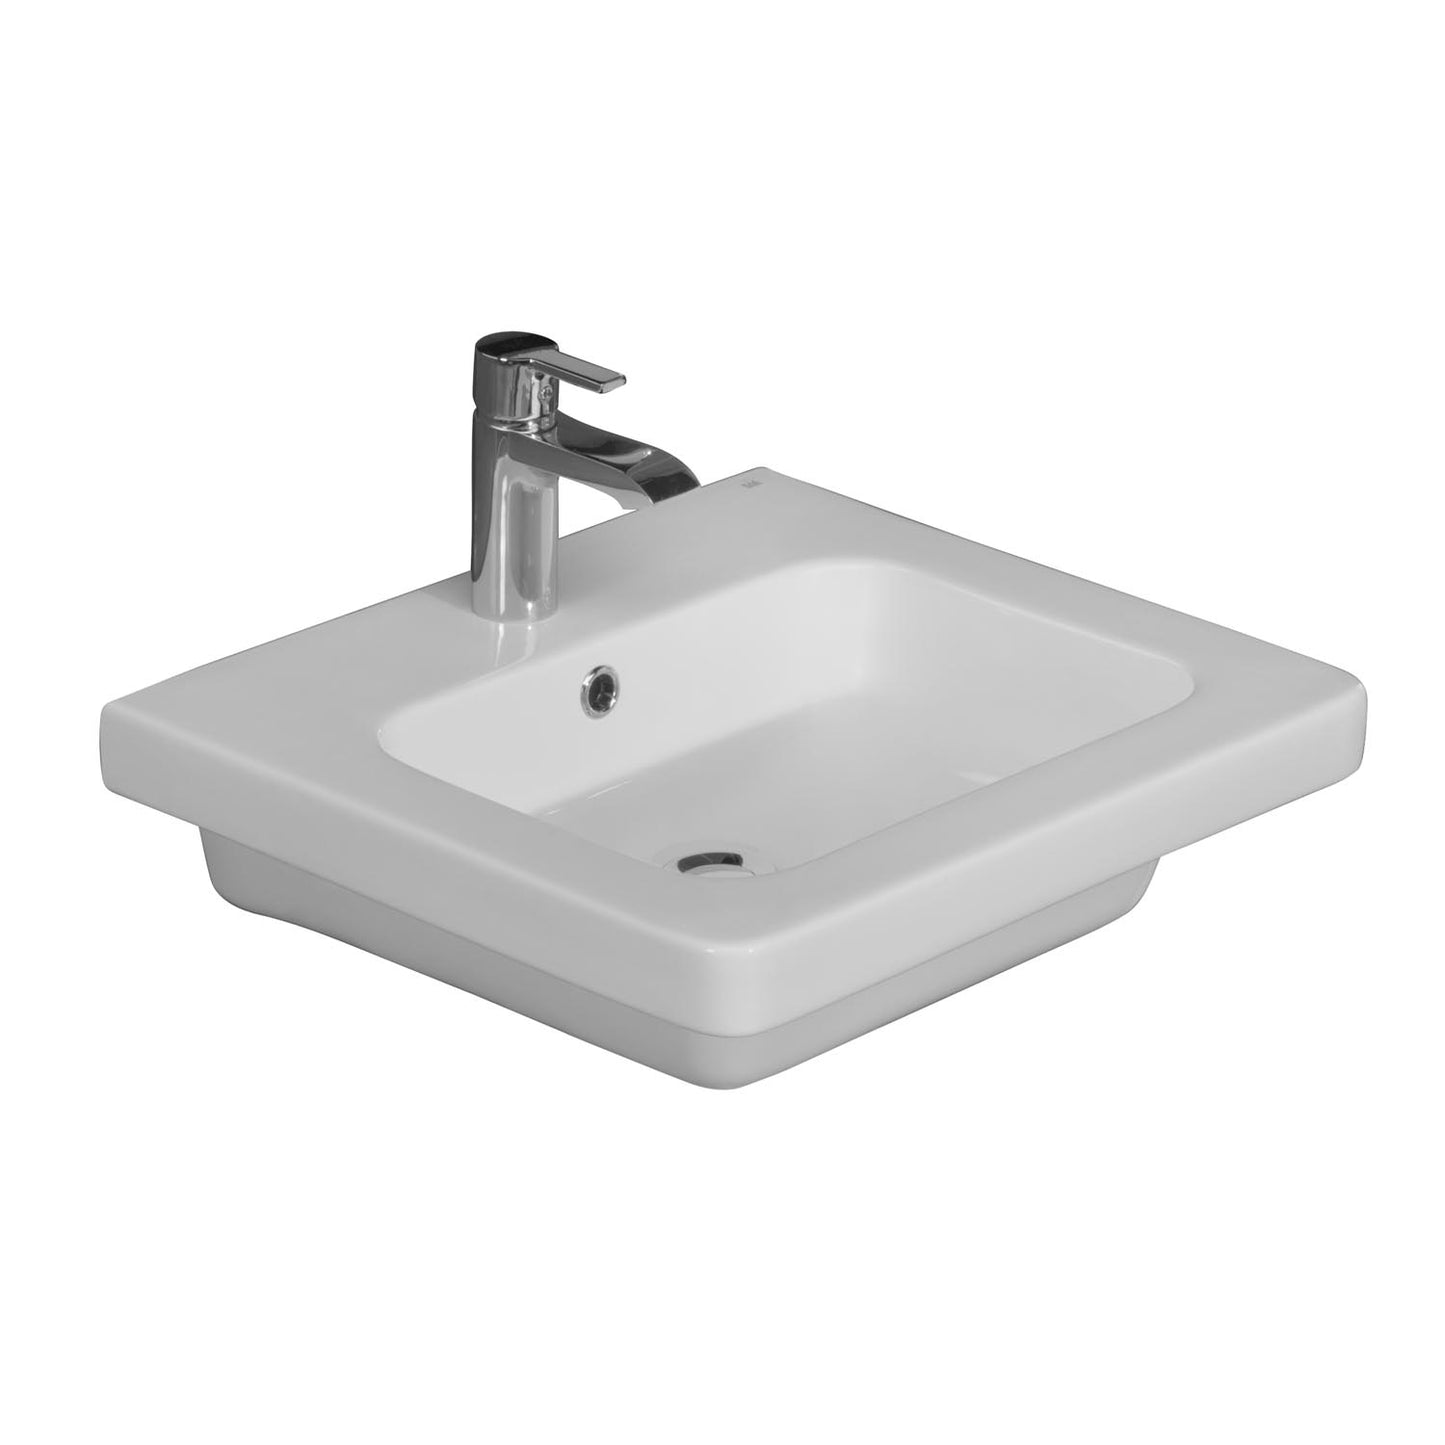 Resort 500 Wall Hung Bathroom Sink White with 1 Faucet Hole